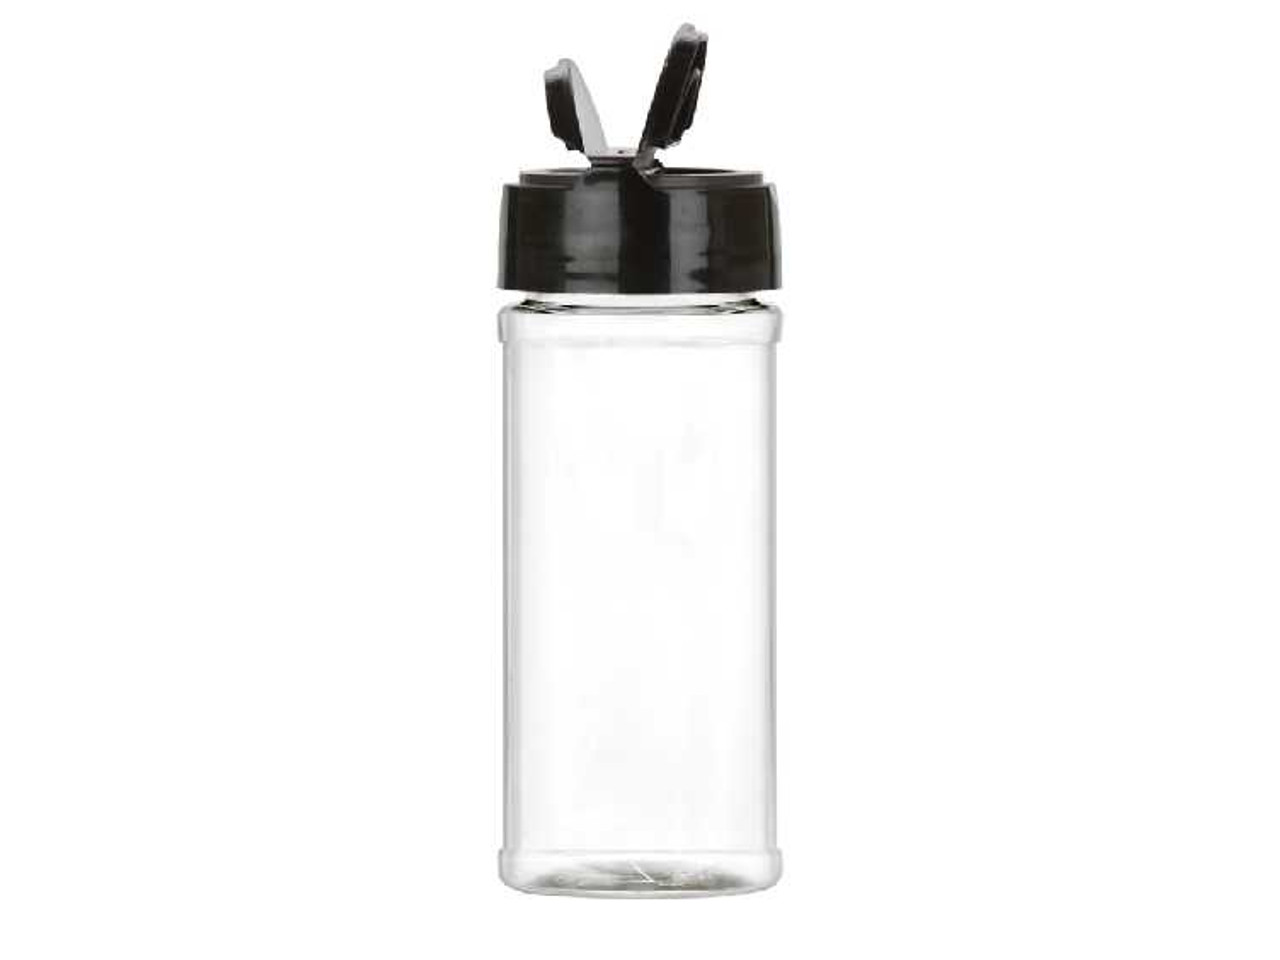 https://cdn11.bigcommerce.com/s-1ybtx/images/stencil/1280x1280/products/555/5647/20-pcs-8-oz-PET-Plastic-Spice-Jar-with-Shake-Dispenser-Cap-in-your-color-choice_4628__69634.1674159200.jpg?c=2?imbypass=on